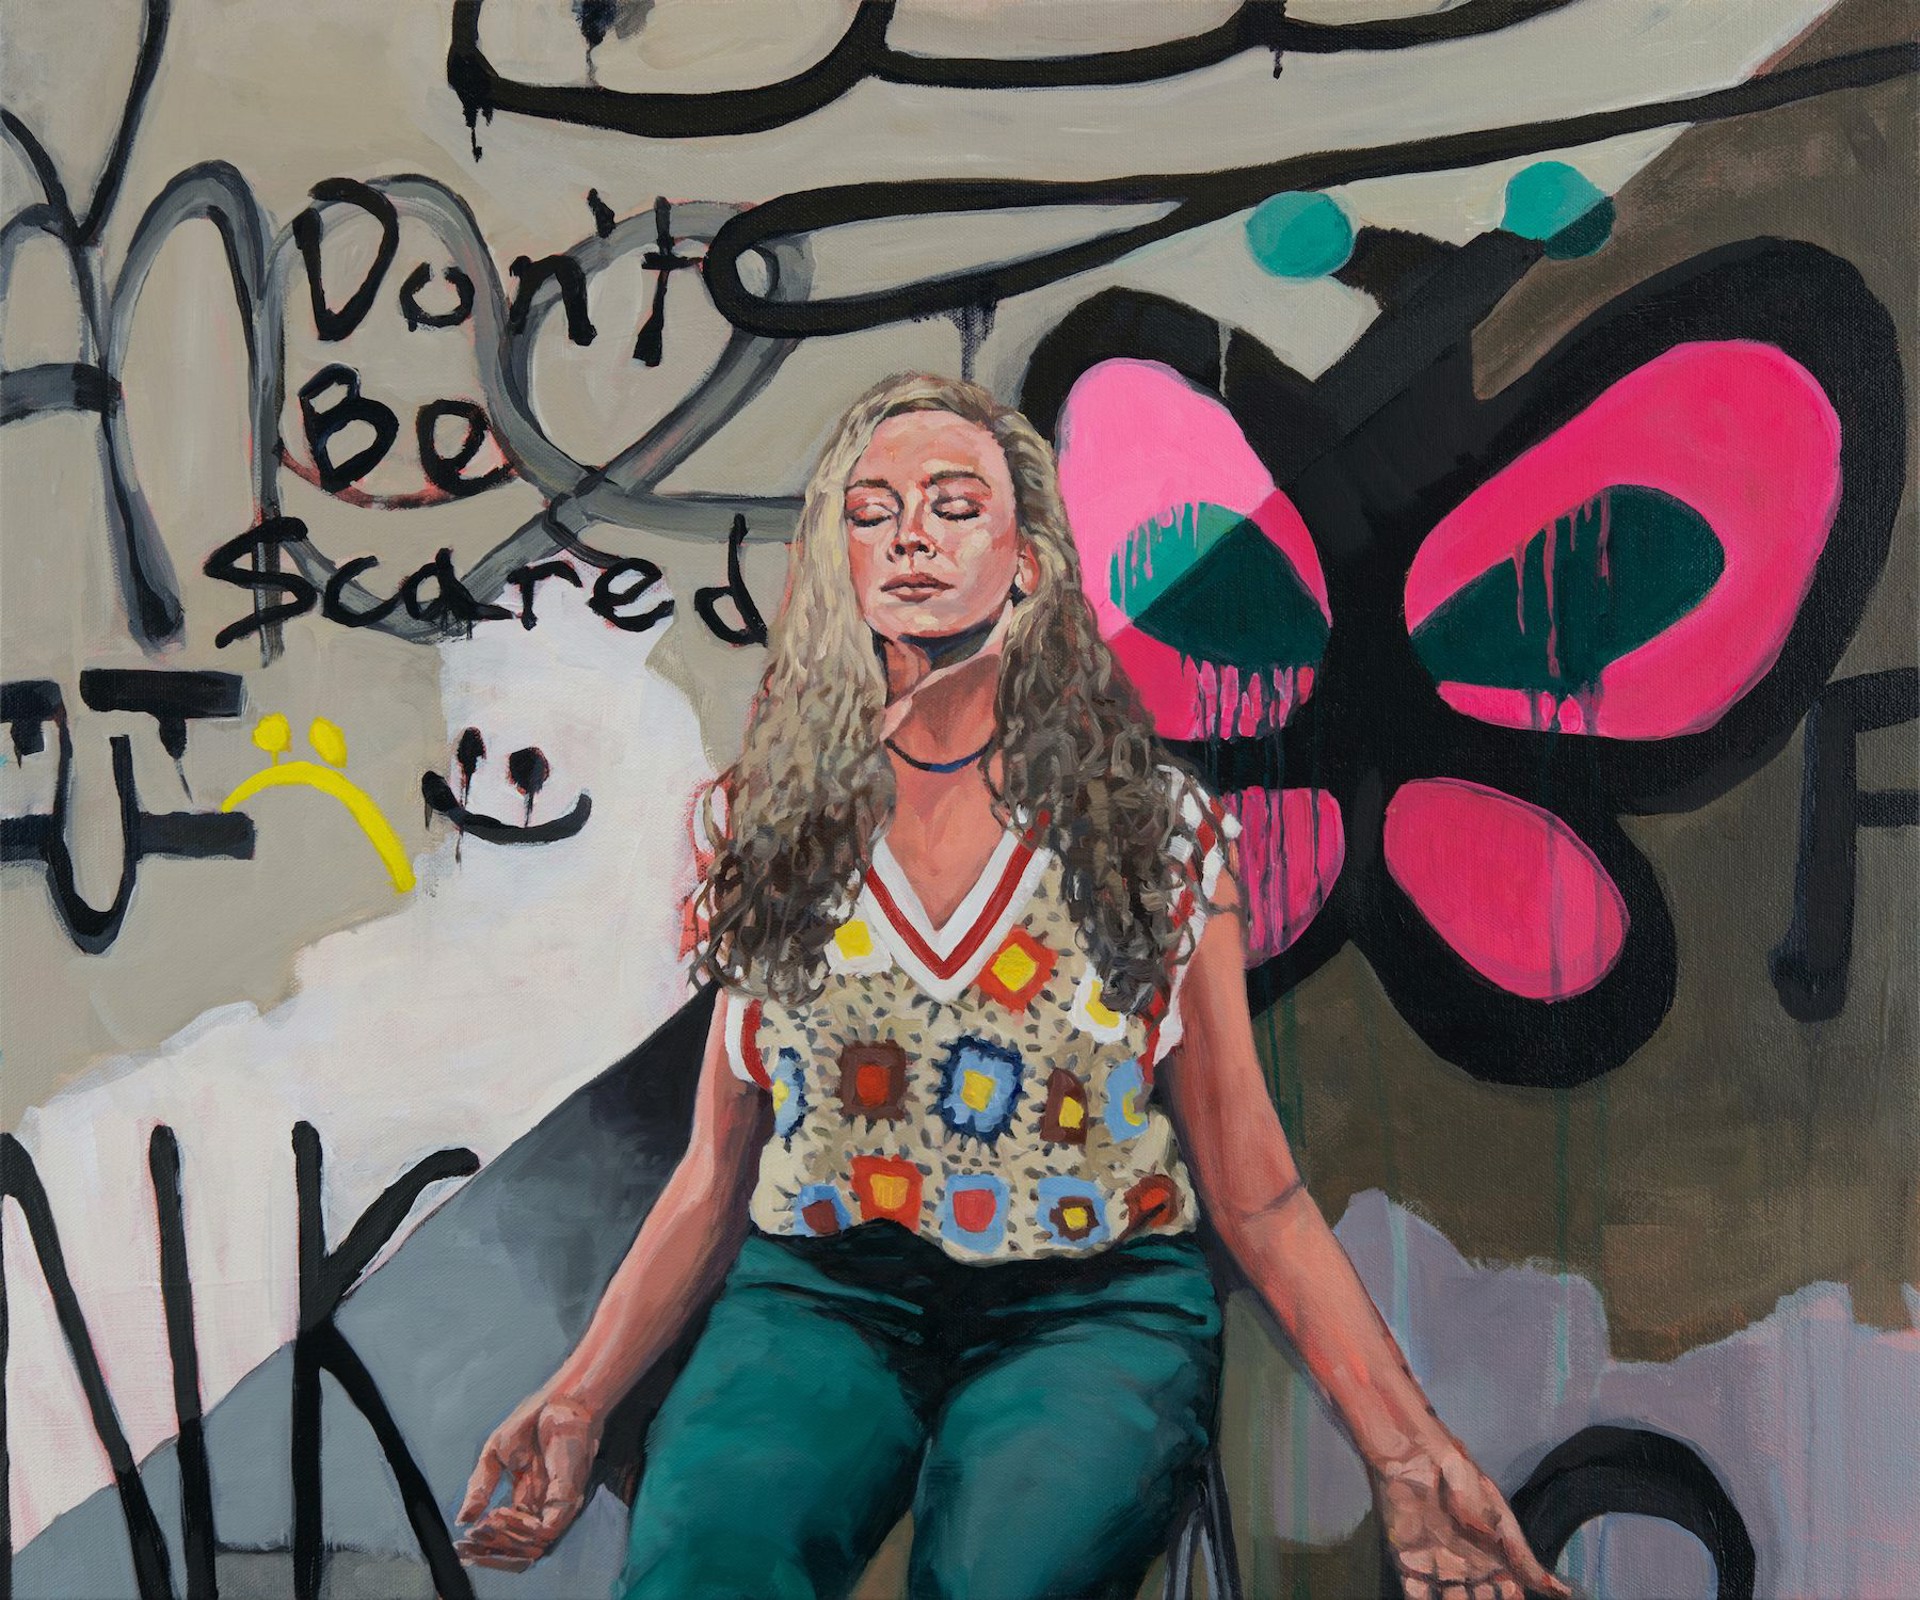 Don't Be Scared by Sharon Shapiro